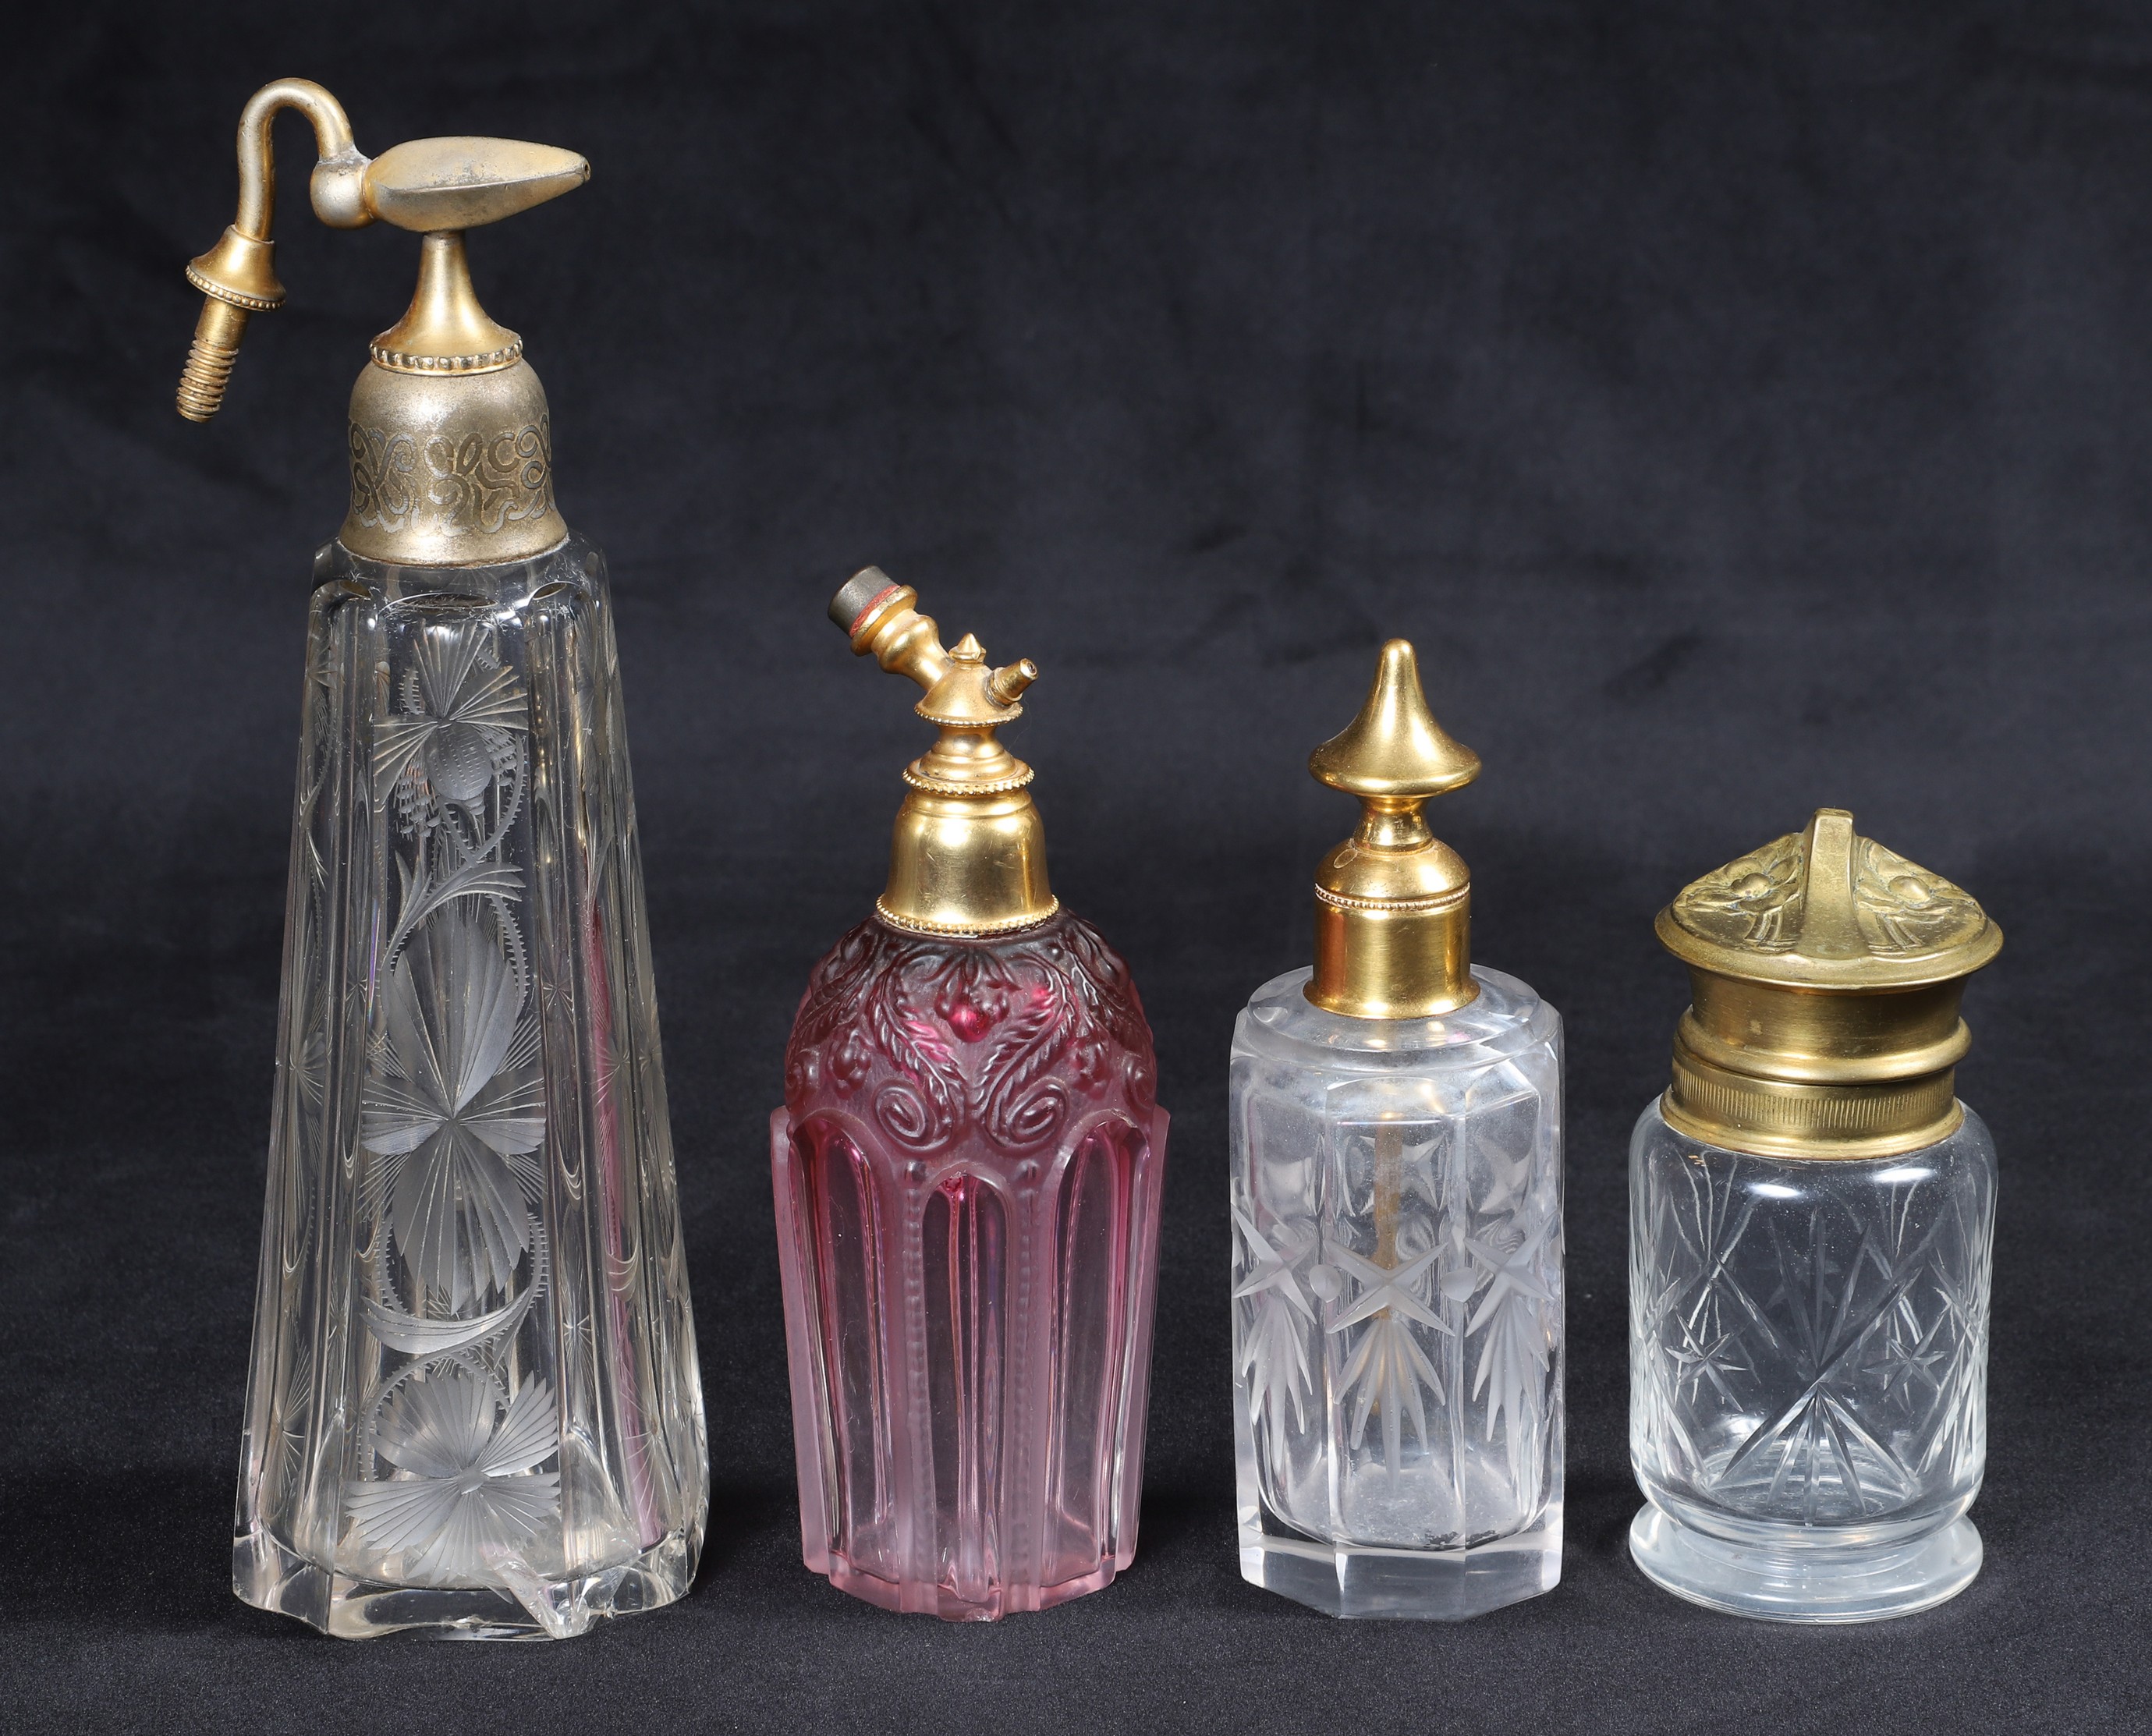  4 Scent bottles and match bottle 2e07aa